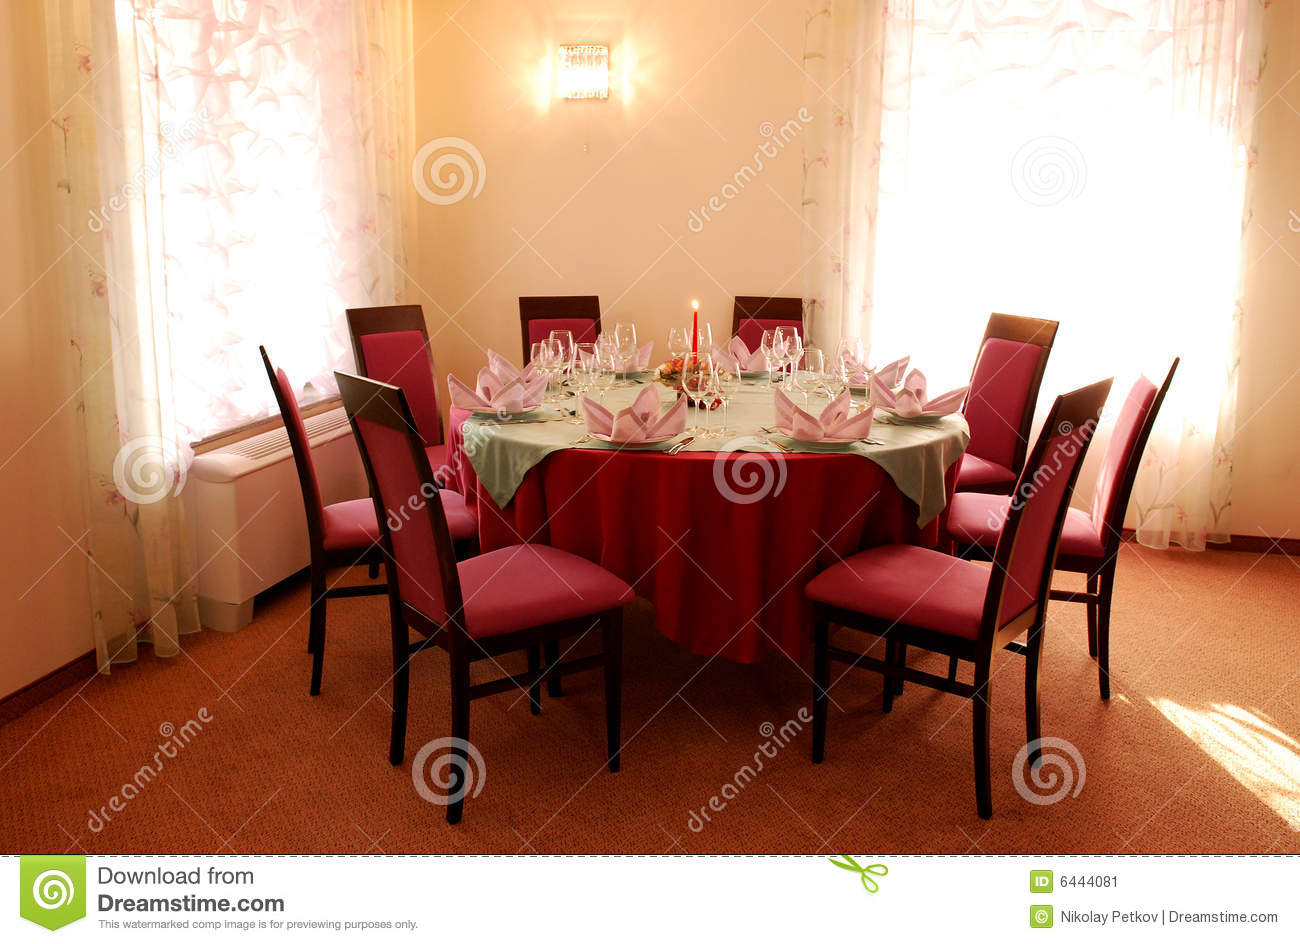 Banquet Table Stock Image   Image  6444081